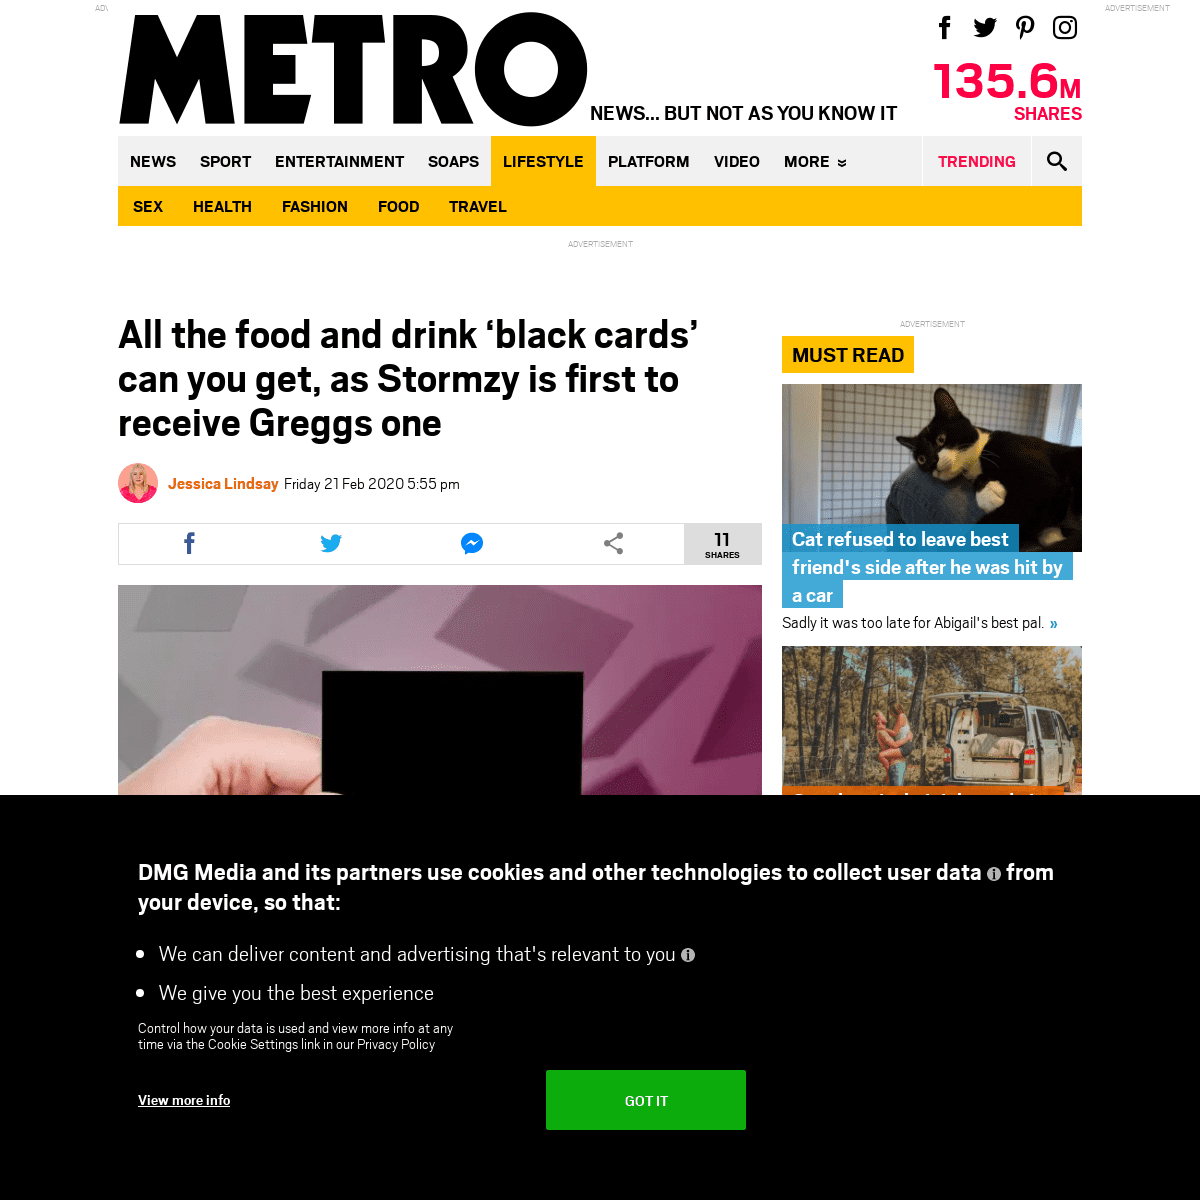 A complete backup of metro.co.uk/2020/02/21/black-cards-can-get-stormzy-first-receive-greggs-one-12280086/